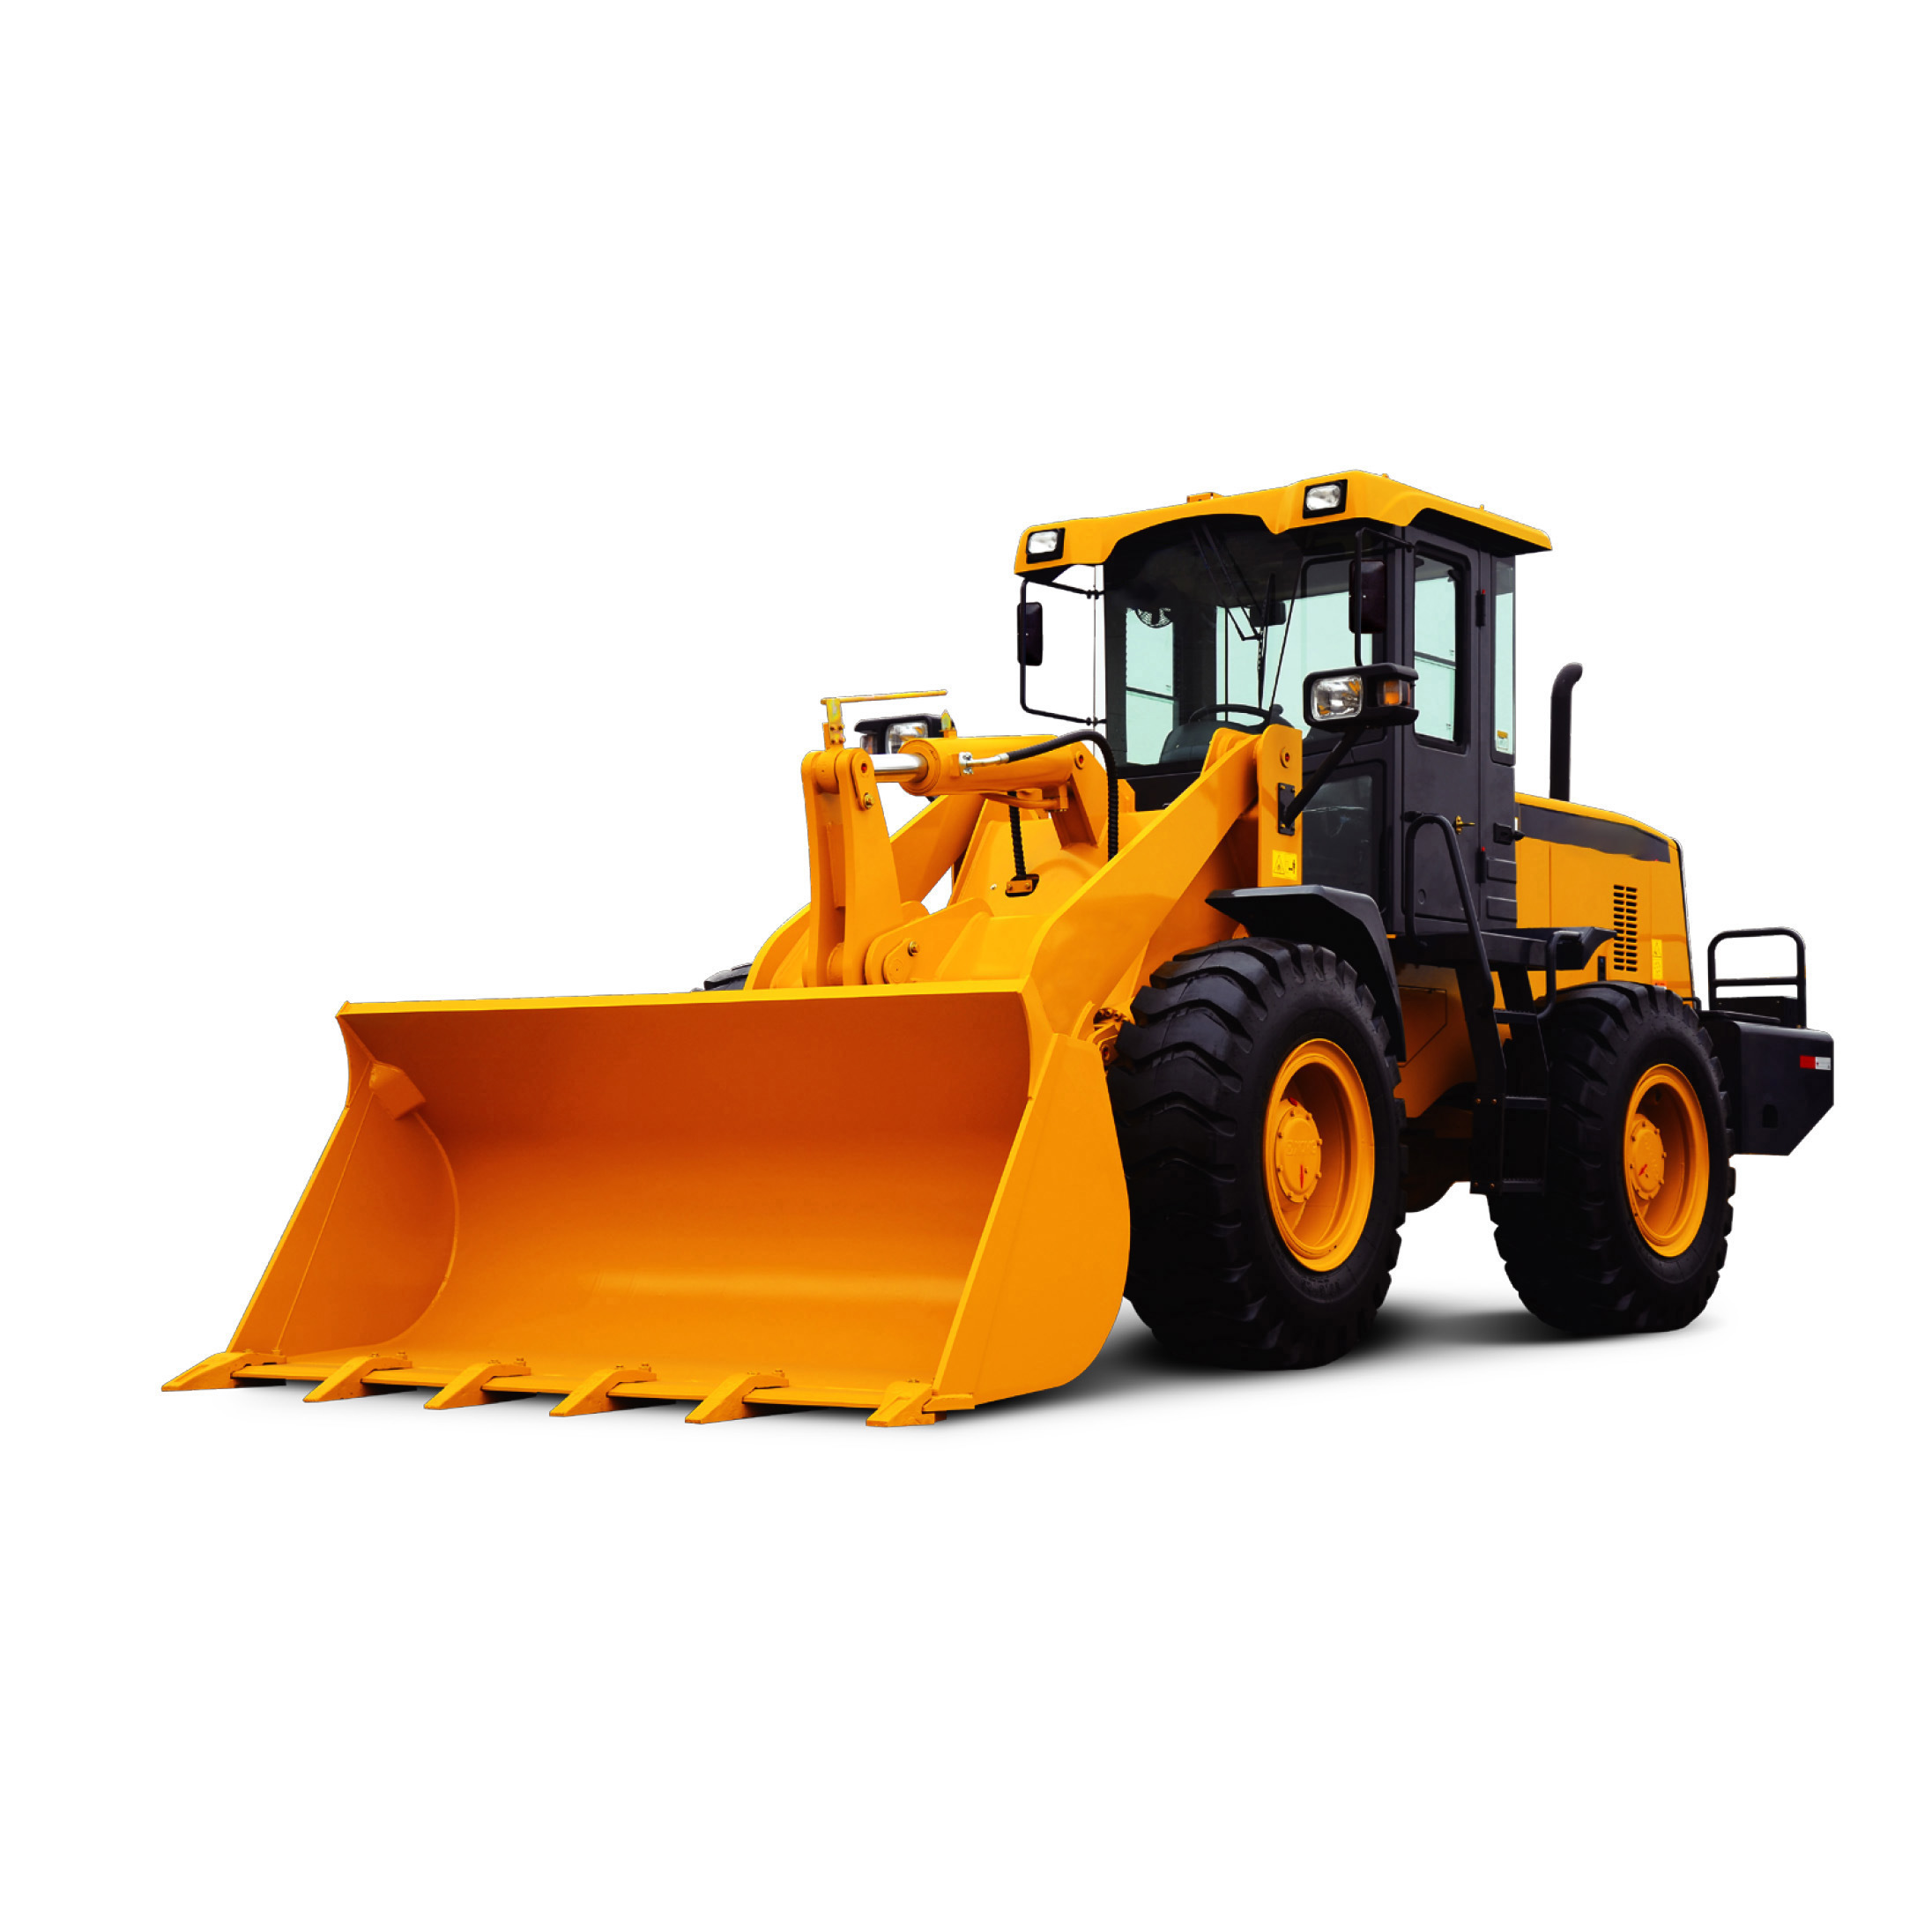 Lw300fv 3 Ton Wheel Loader with Parts for Sell